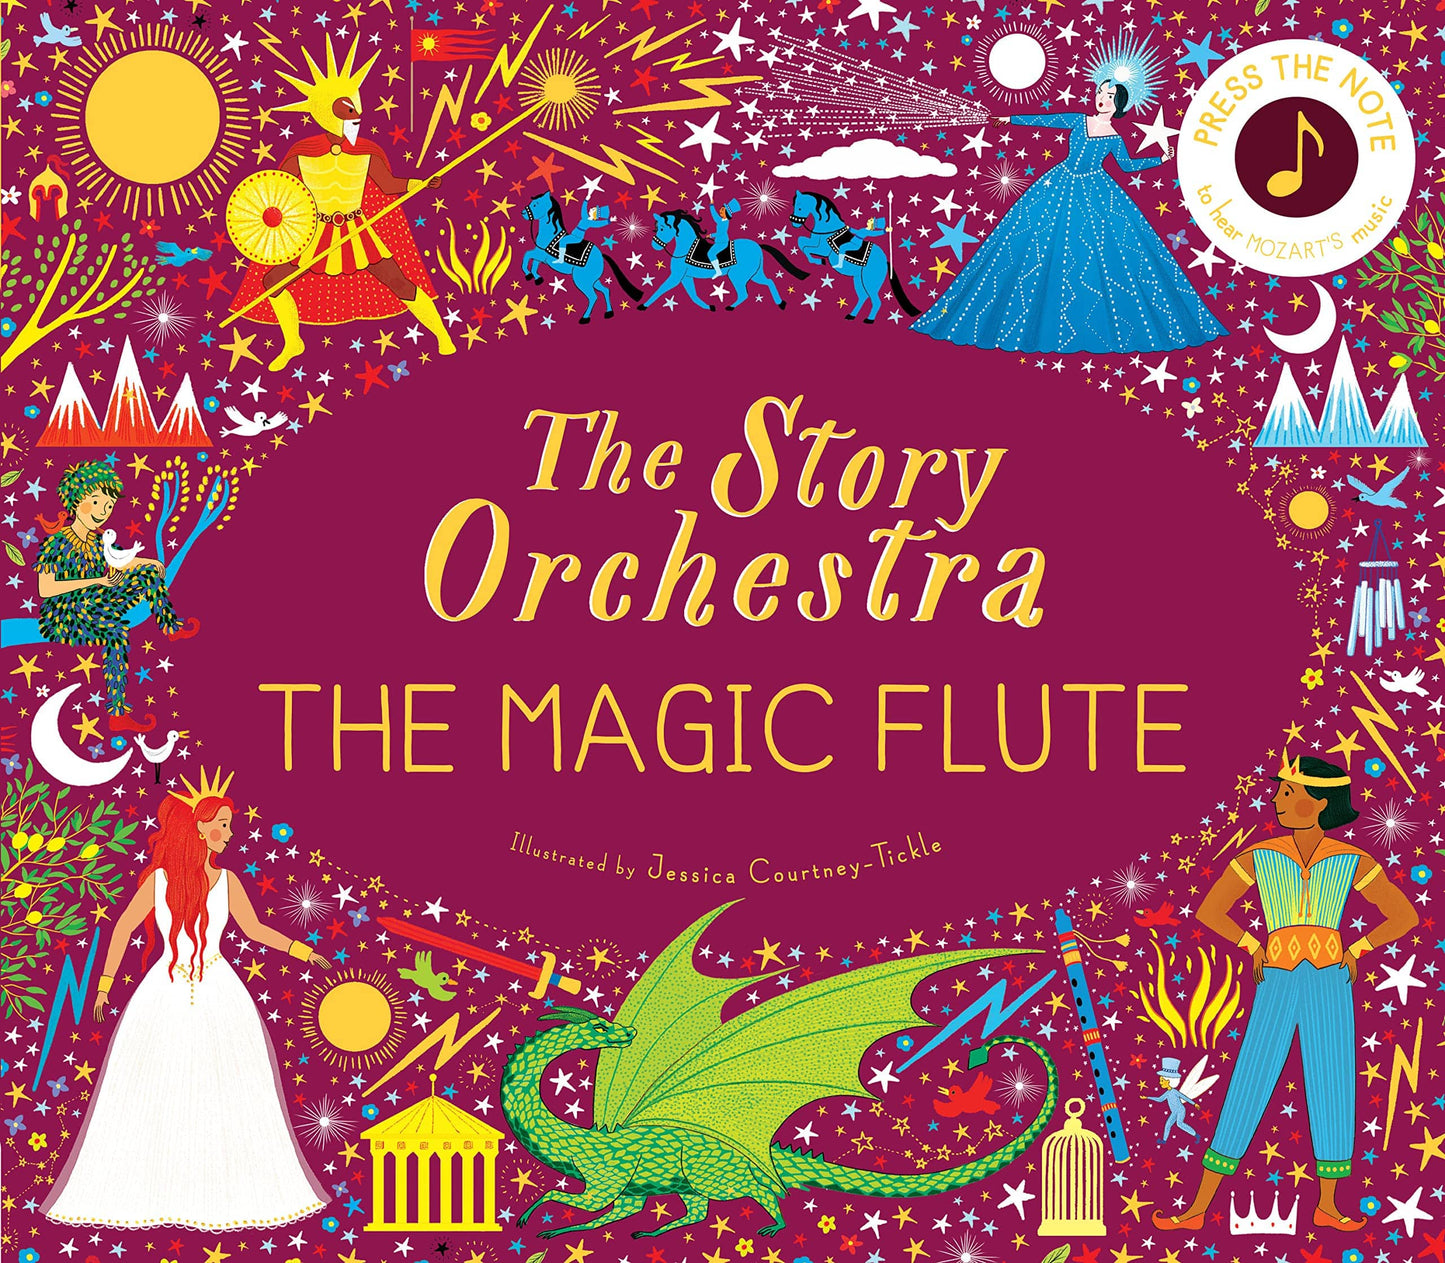 Book Bag Doha  The Story Orchestra: The Magic Flute: Press the note to hear Mozart's music Hardcover  by Katy Flint (Author), Jessica Courtney-Tickle  (Illustrator)